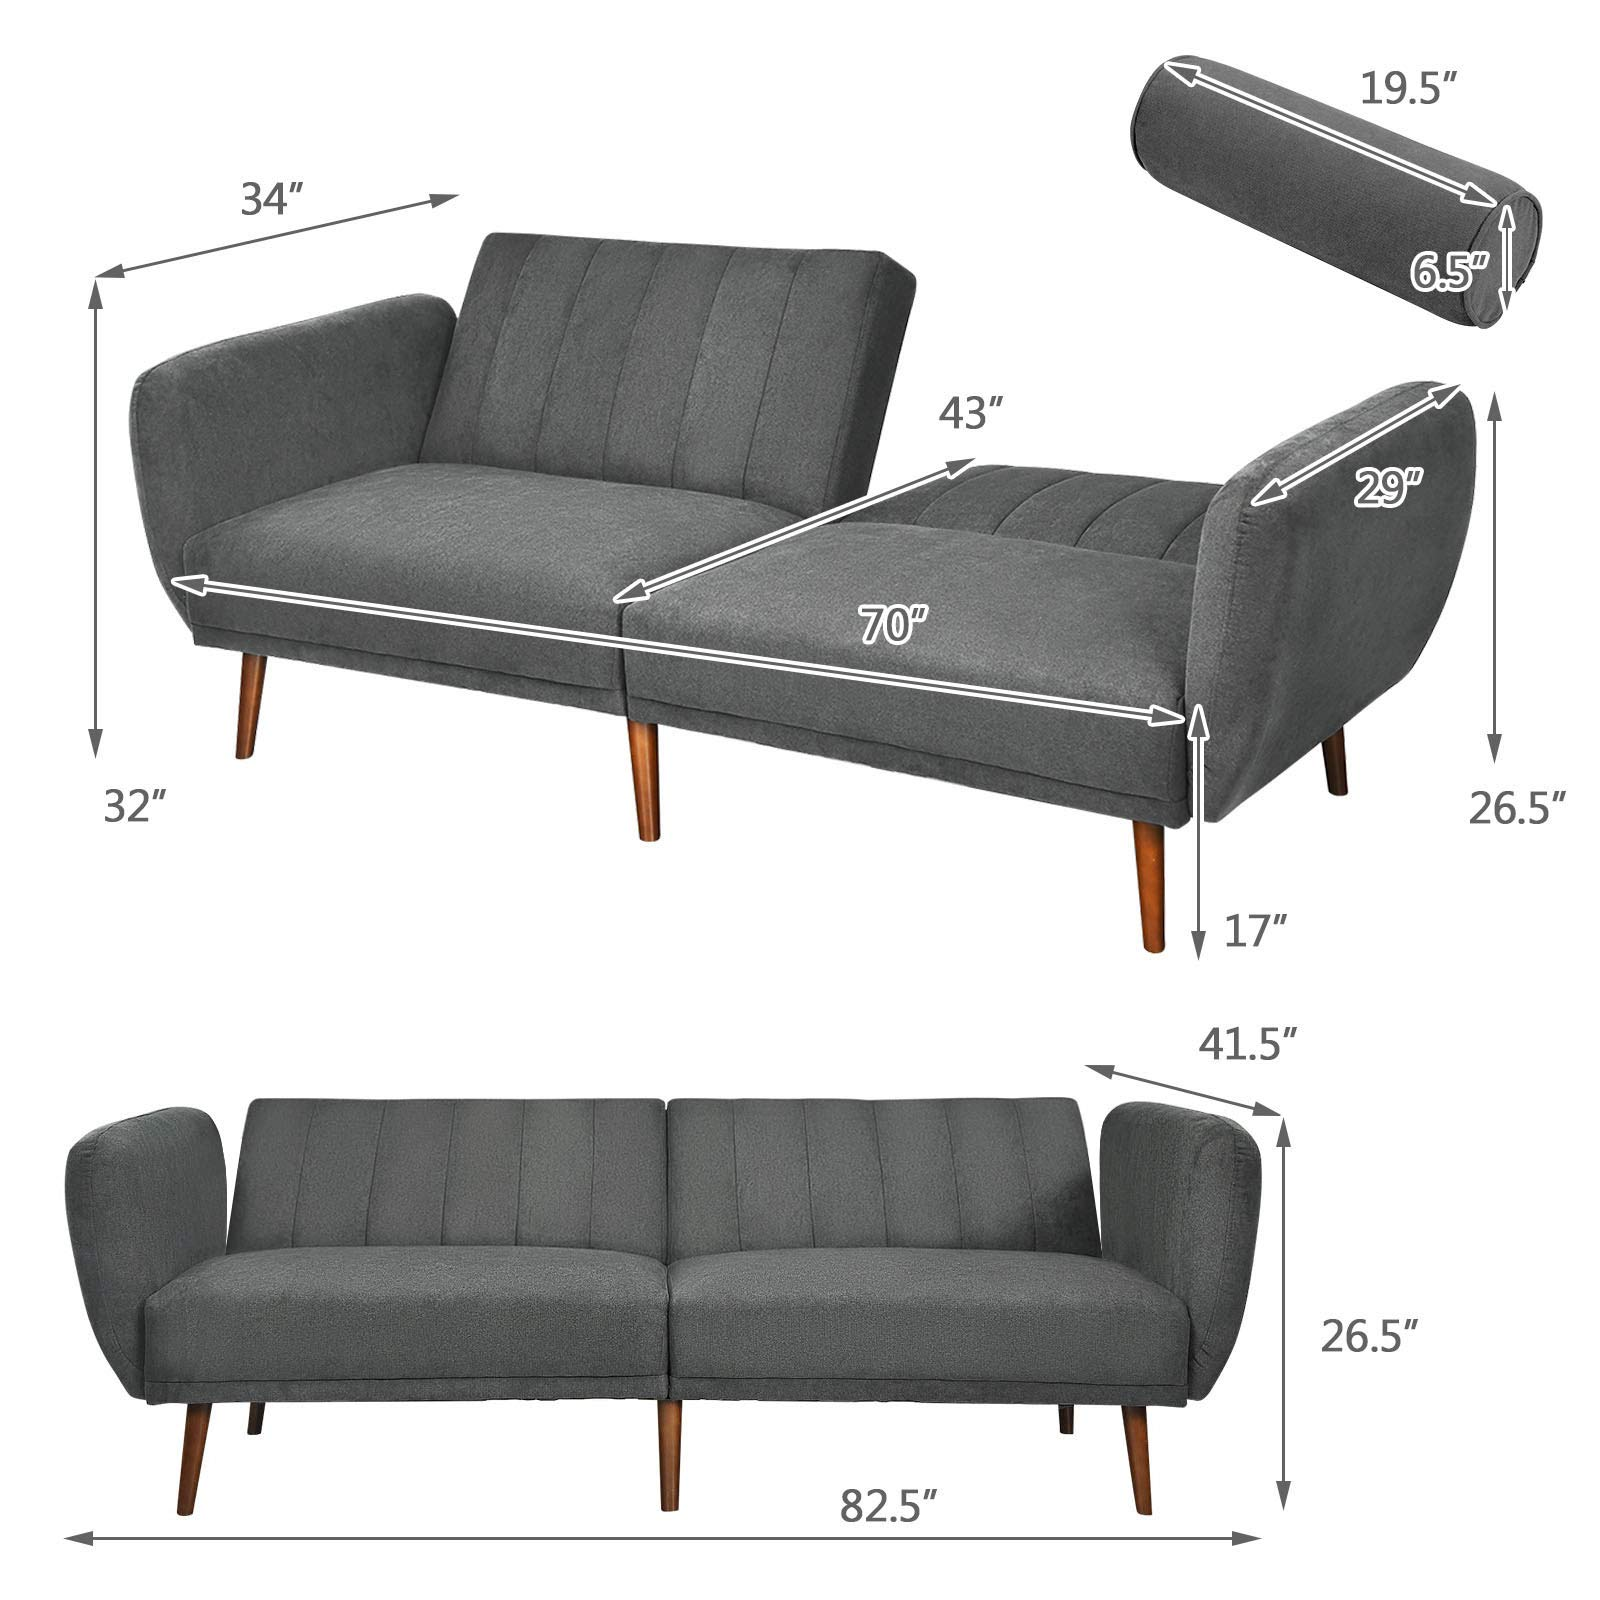 Giantex Foldable Futon Sofa Bed, Convertible Sofa Couch Upholstered Futon Sleeper Sofa with Pillow